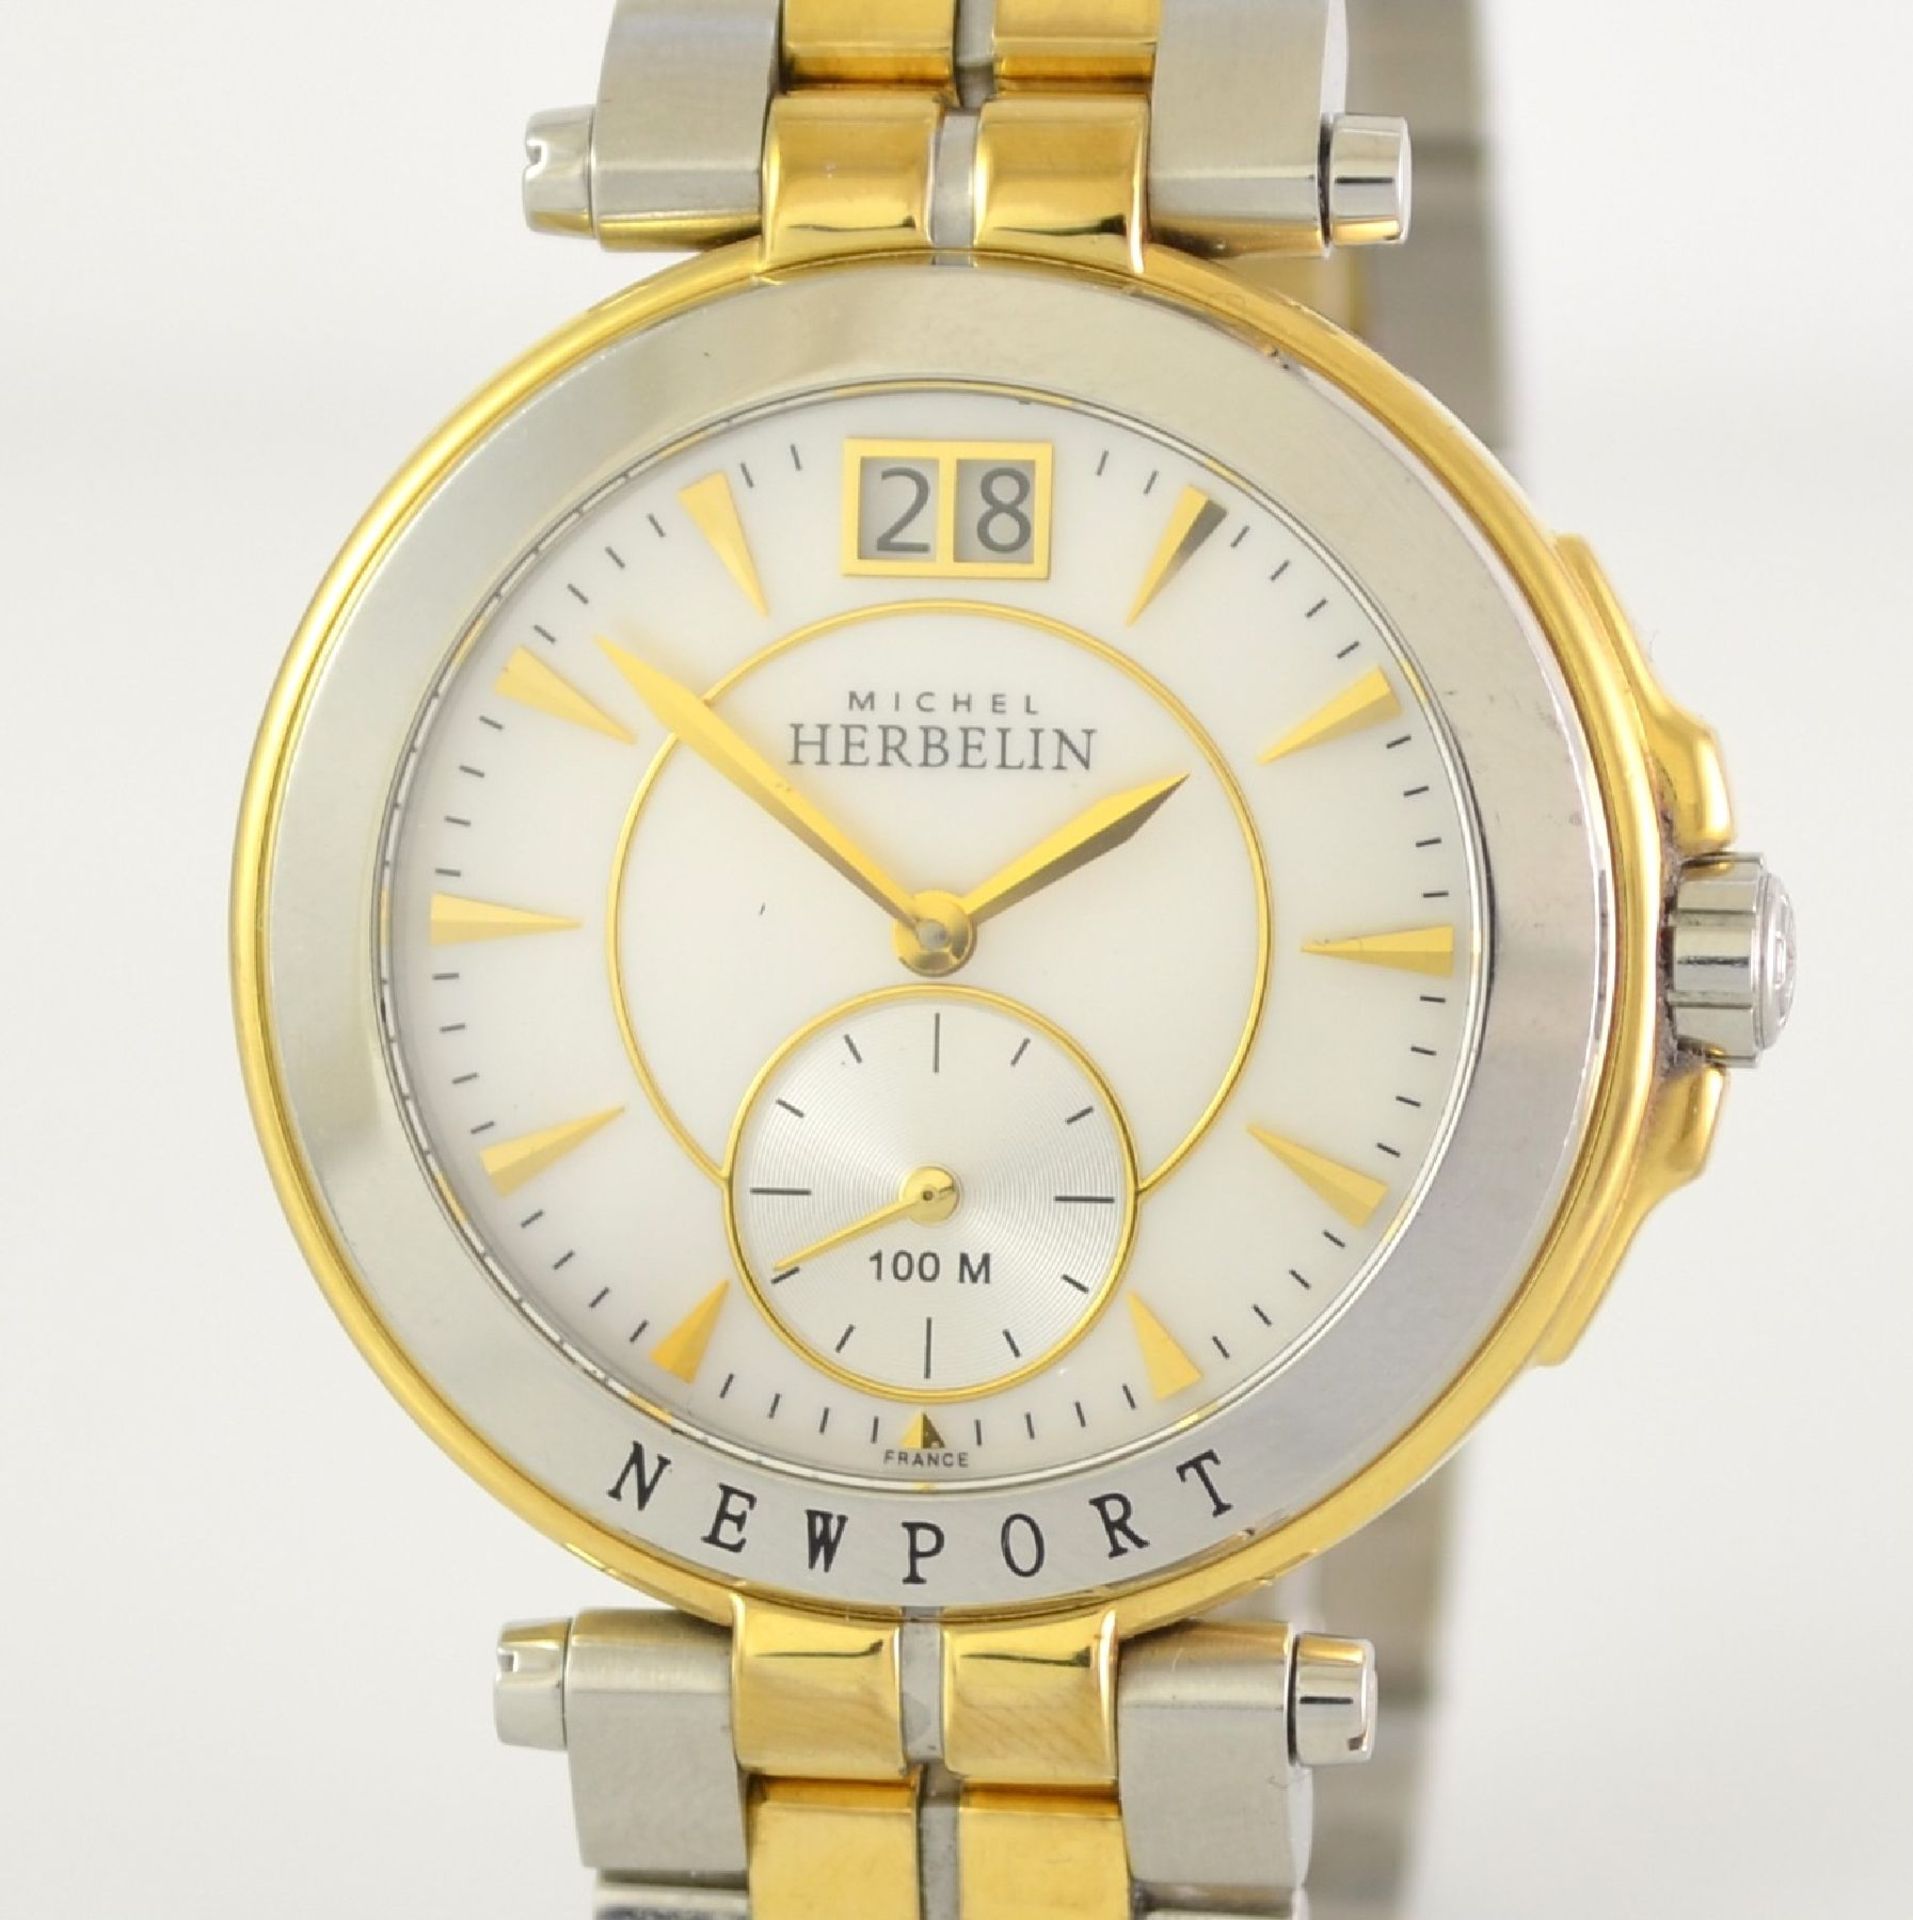 MICHEL HERBELIN ladies wristwatch Newport Yacht Club, France around 2015, reference 18266, stainless - Image 4 of 7